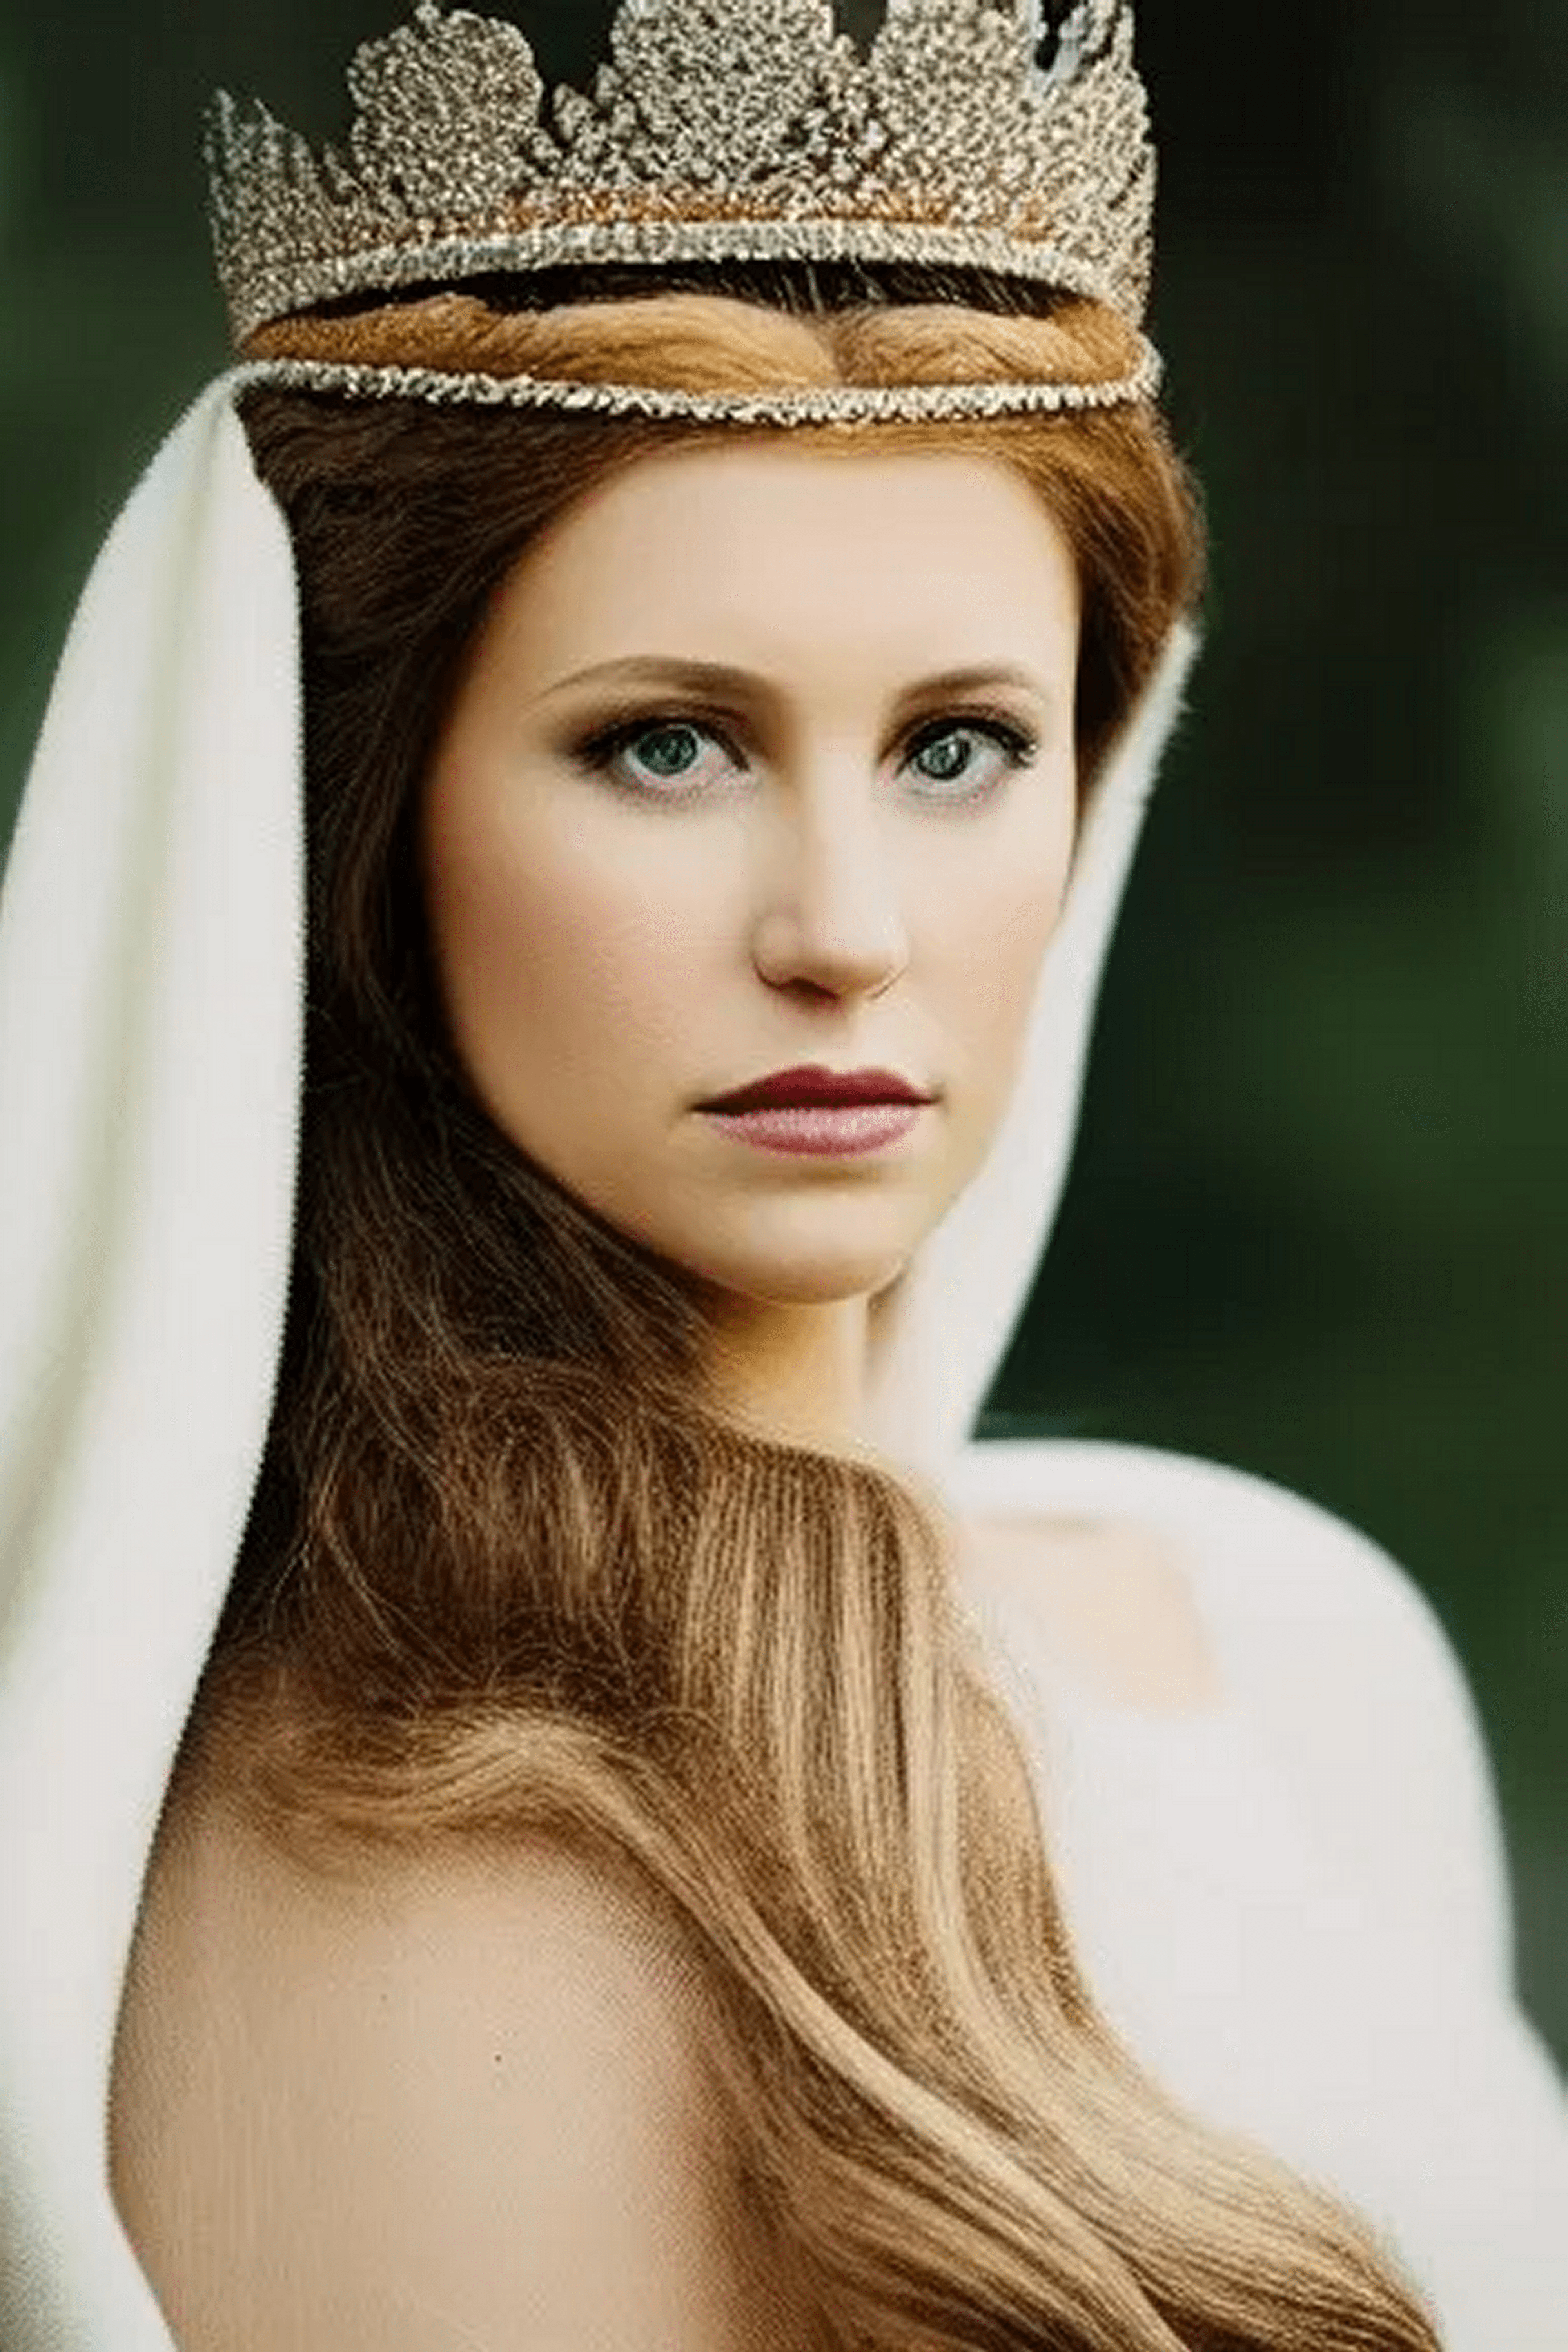 AI Queen Guinevere wife of King Arthur created by Sollog